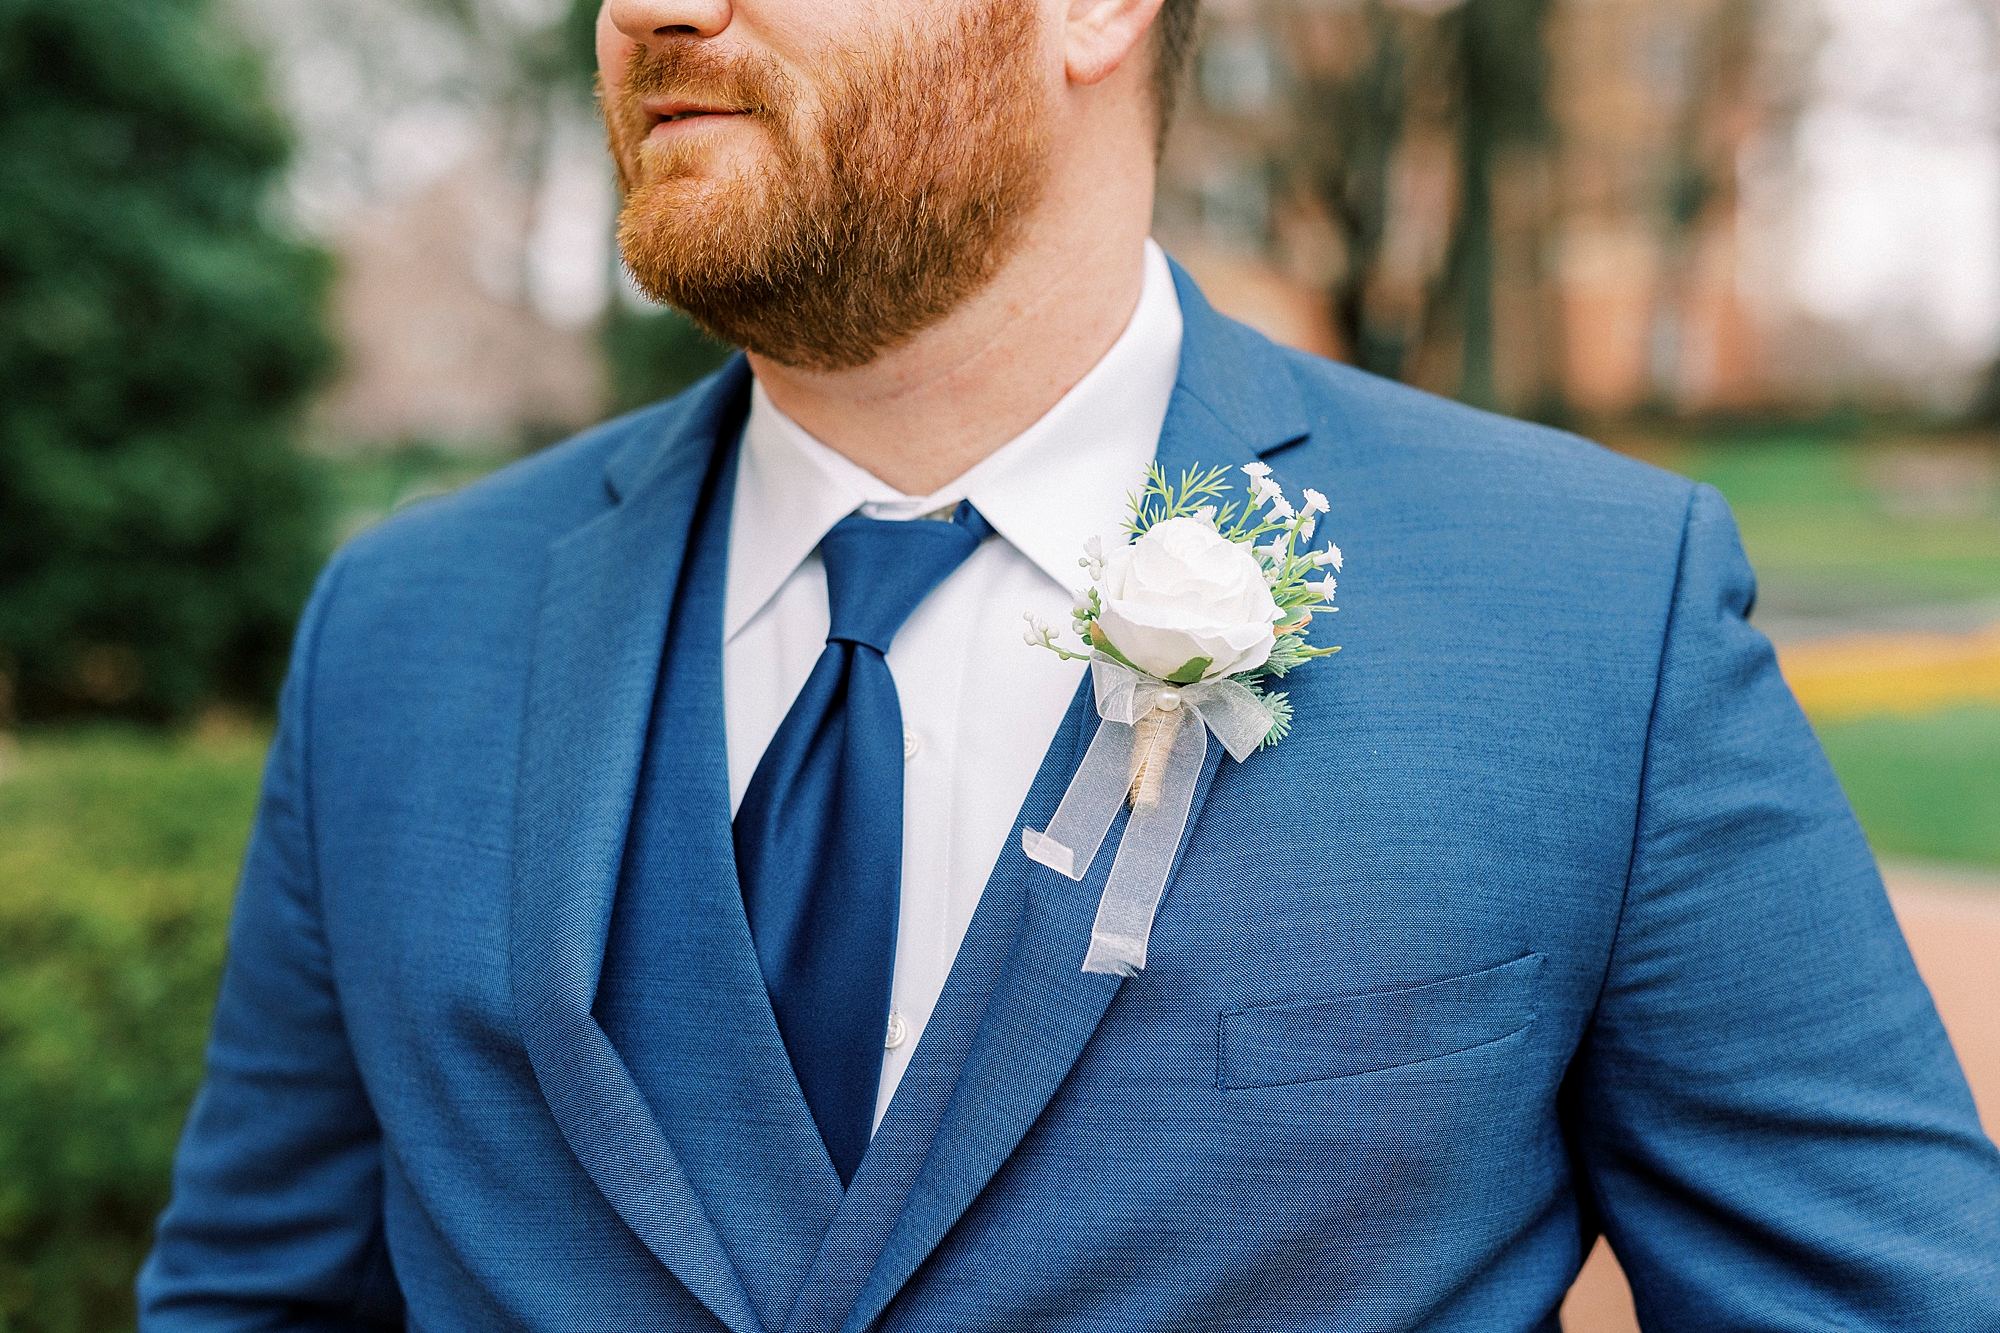 groom stands with white flower on lapel of blue suit 